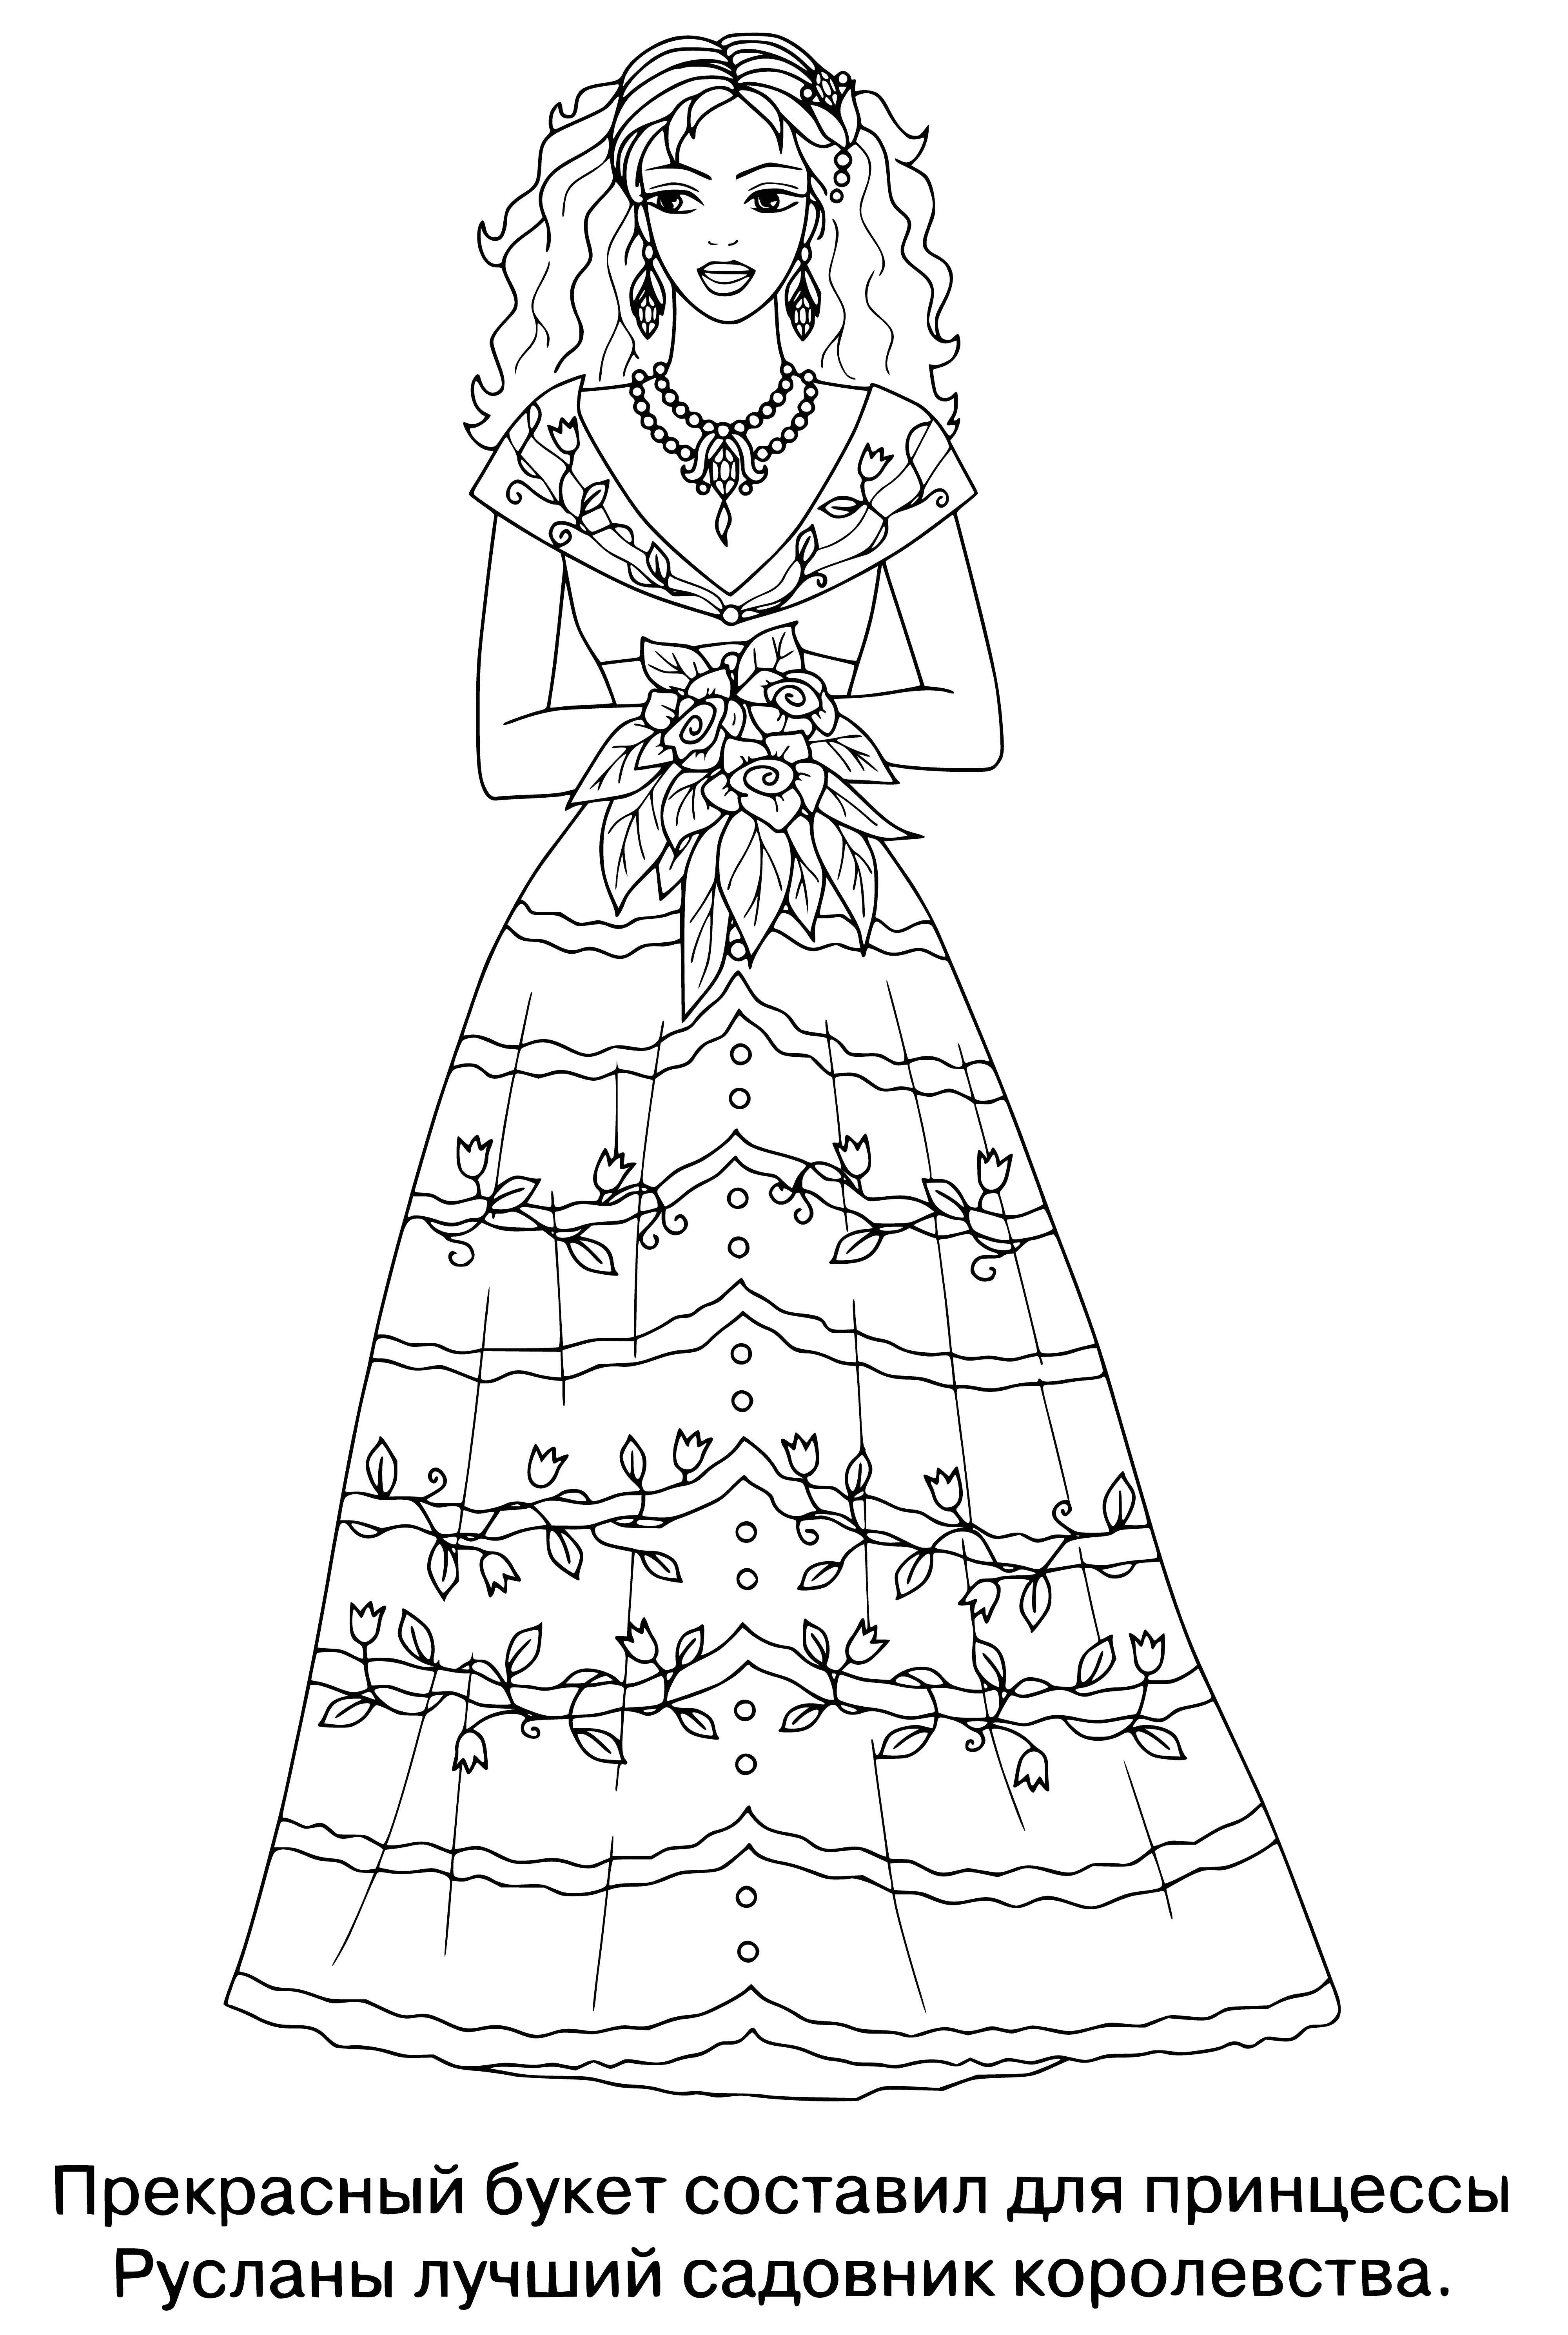 coloring page: Beautiful young princess w/ pale skin, long dark hair & pink dress casts a spell w/ wand, surrounded by a group of castle towers.